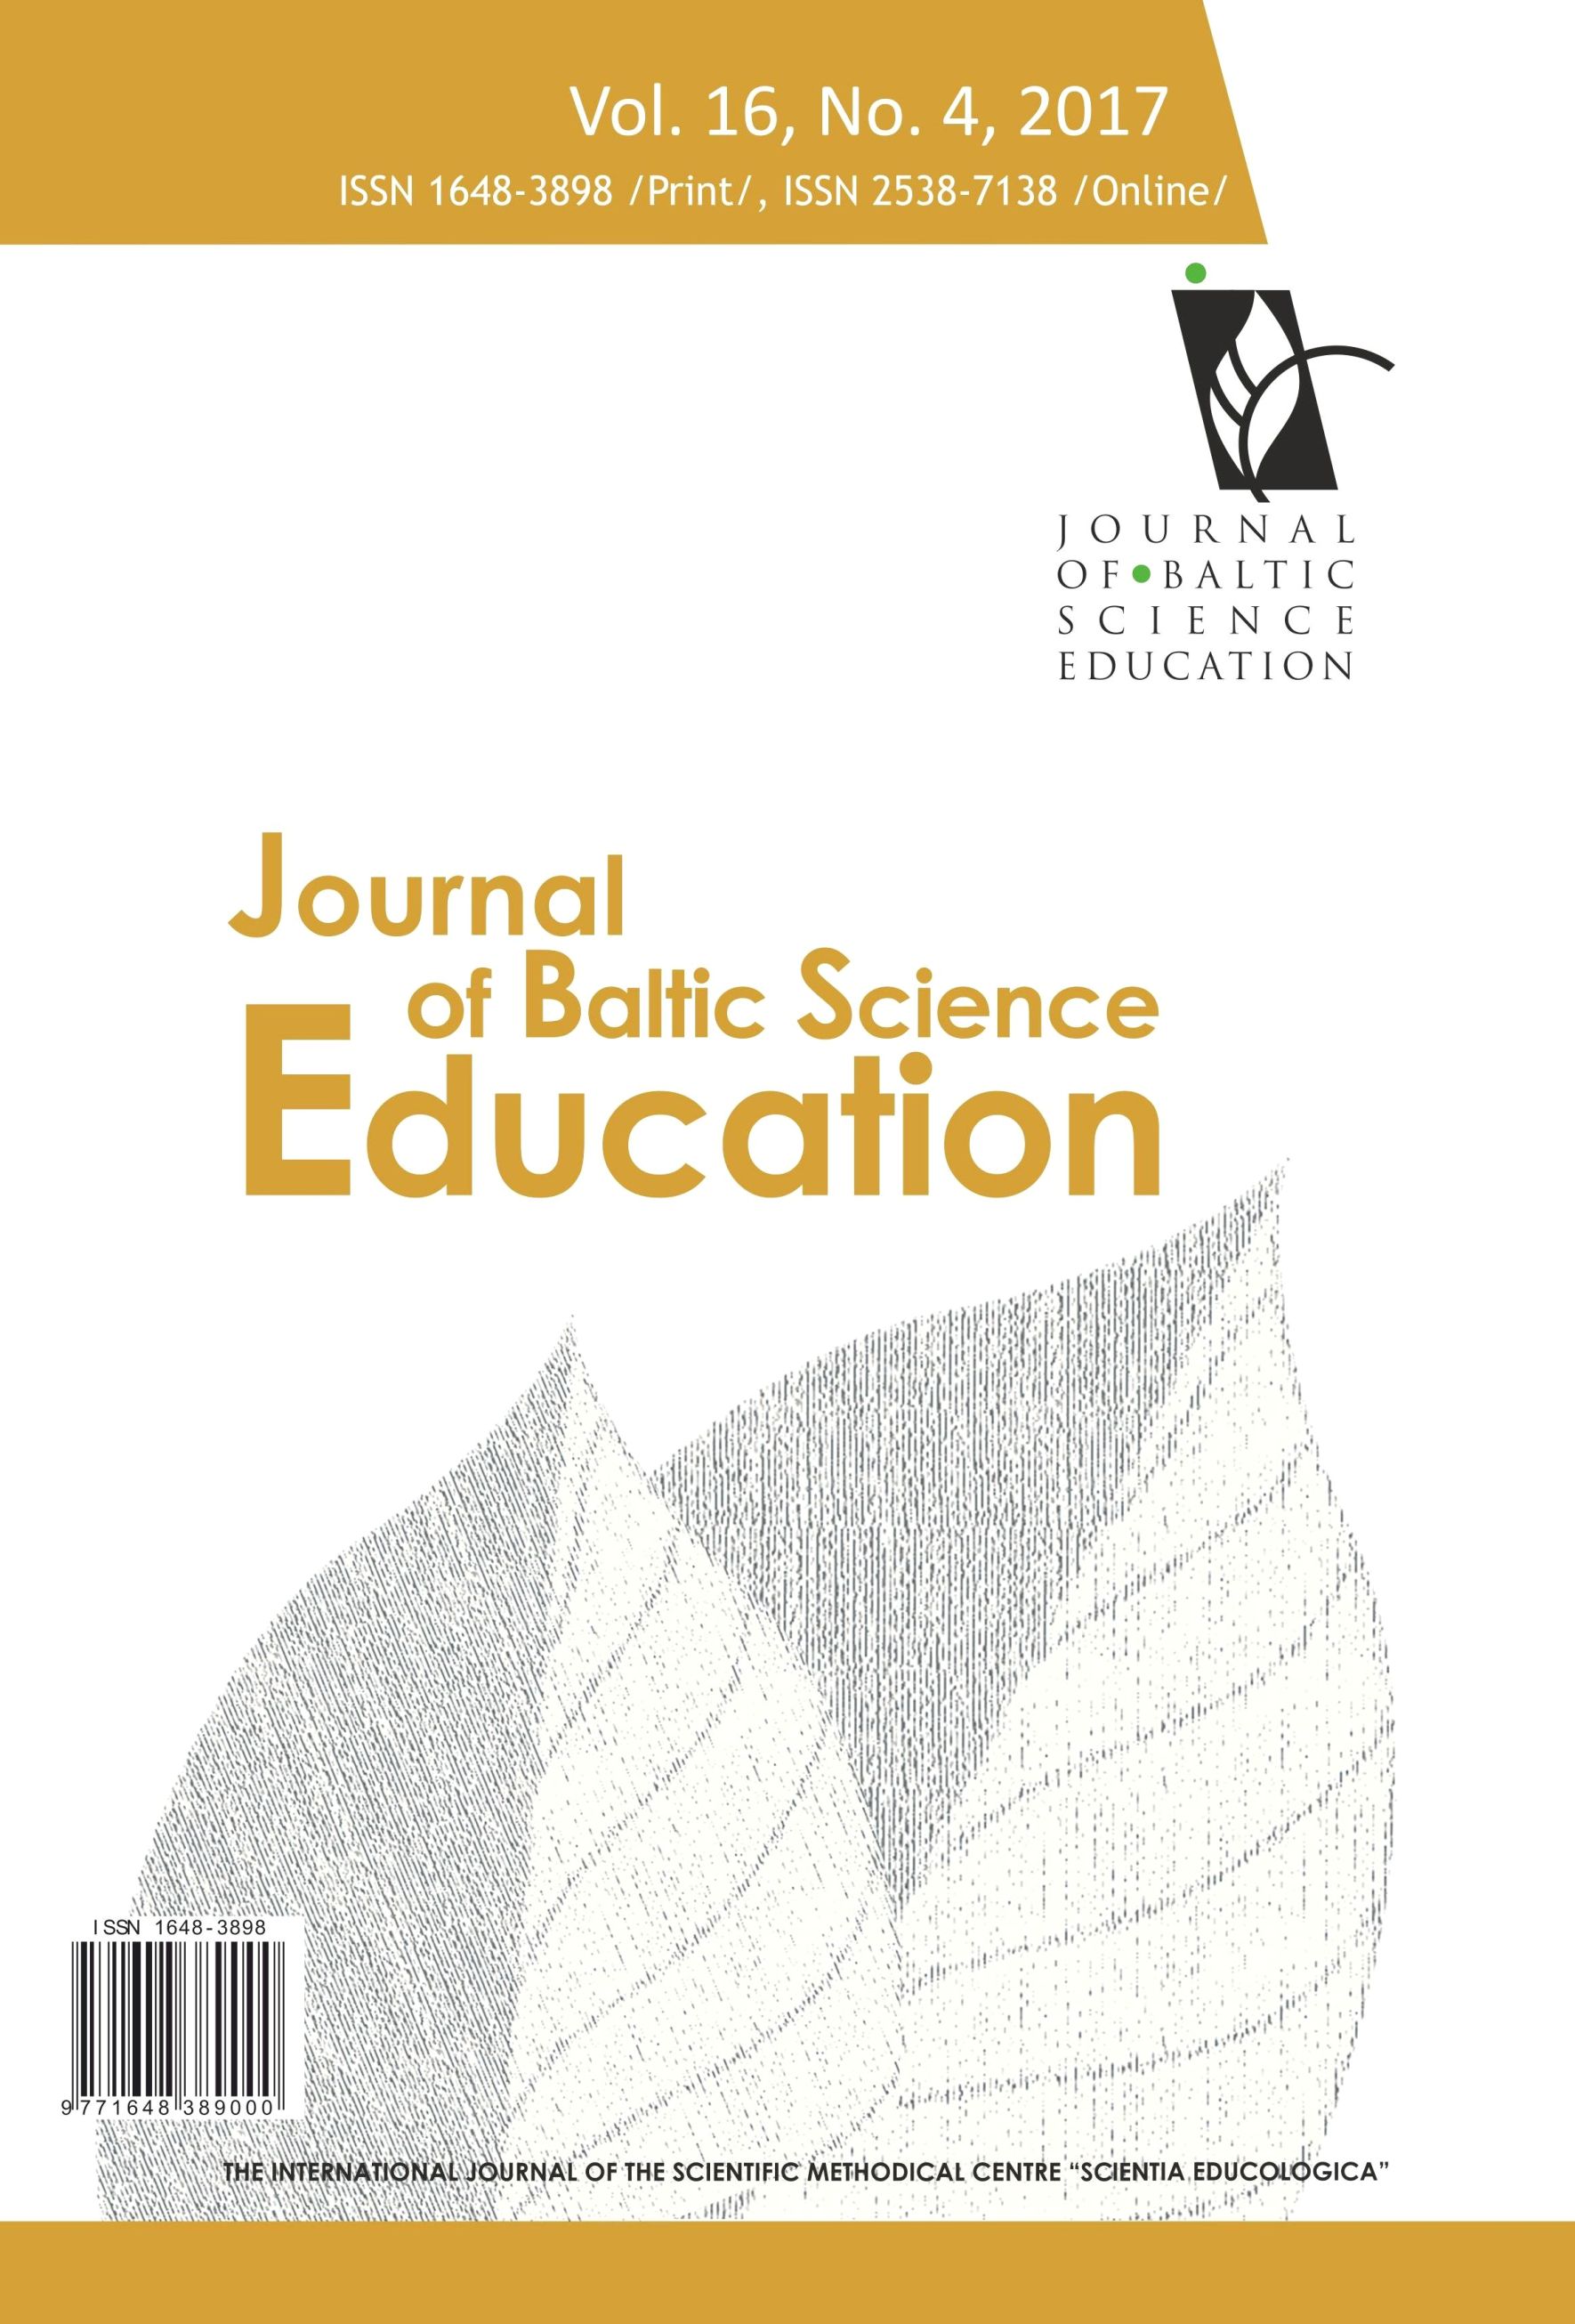 DEVELOPMENT AND EVALUATION OF AN INSTRUMENT MEASURING ANXIETY TOWARD PHYSICS LABORATORY CLASSES AMONG UNIVERSITY STUDENTS